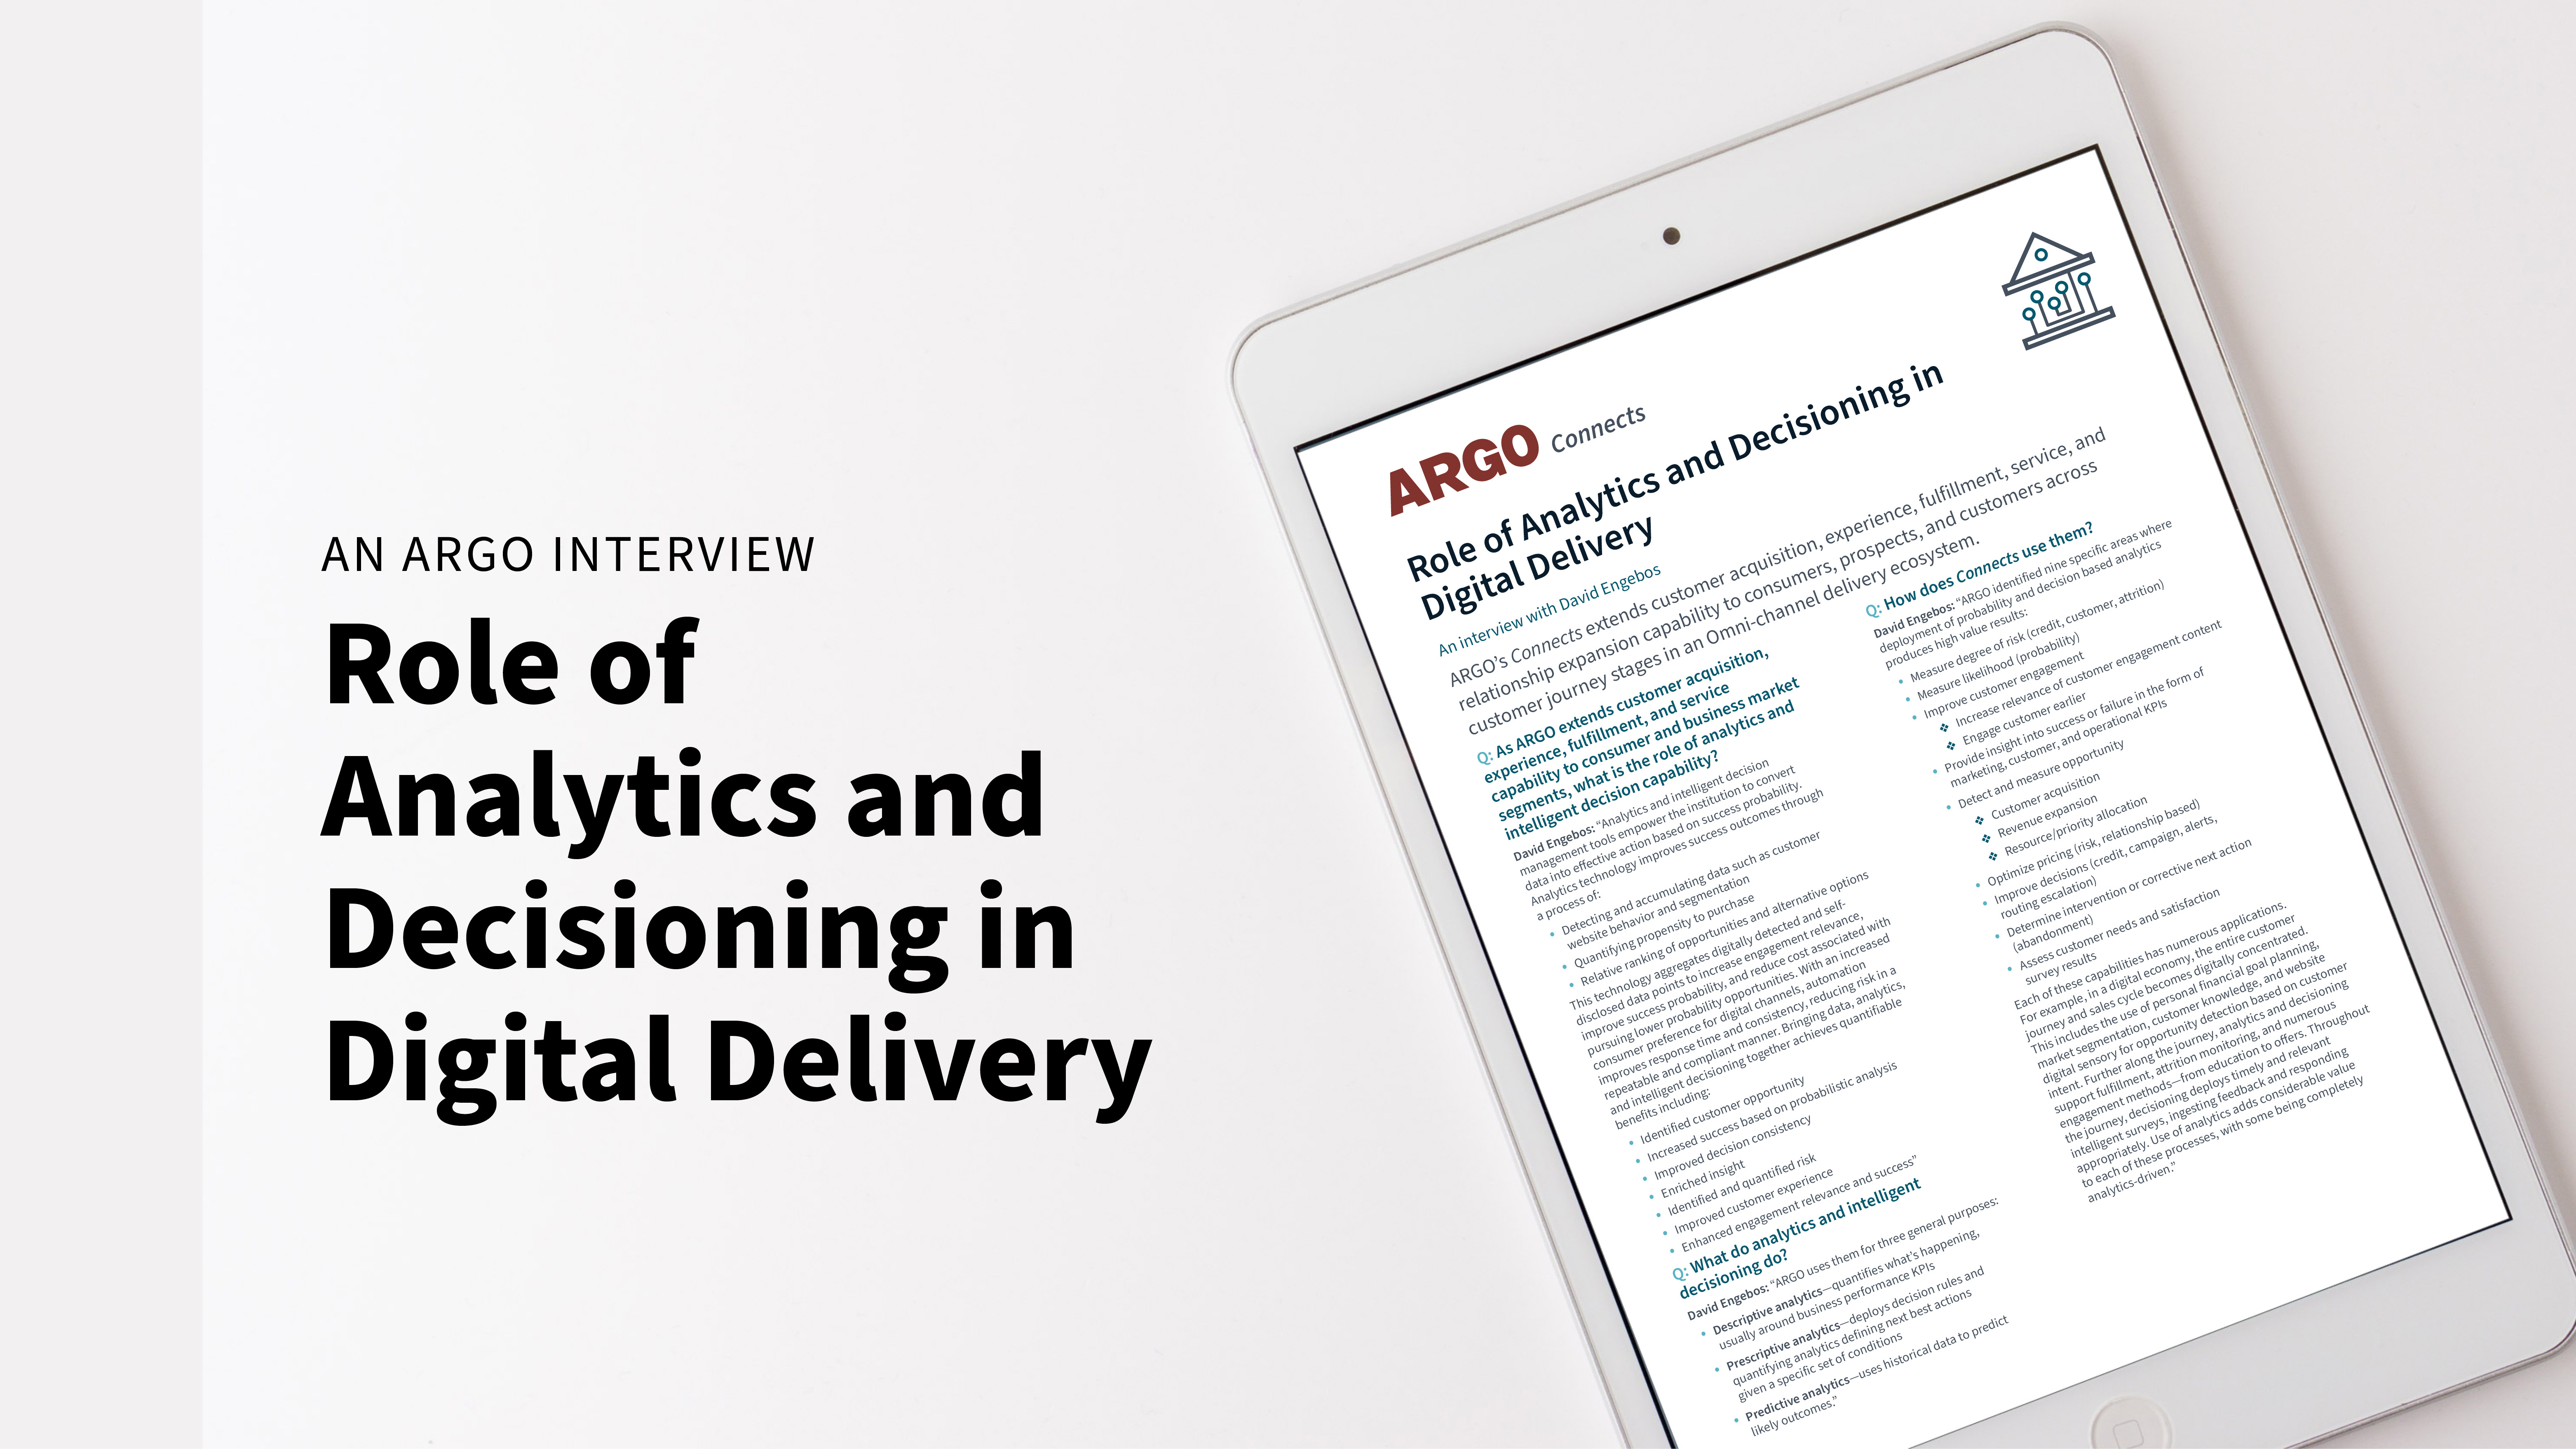 Role of Analytics and Decisioning in Digital Delivery[51]